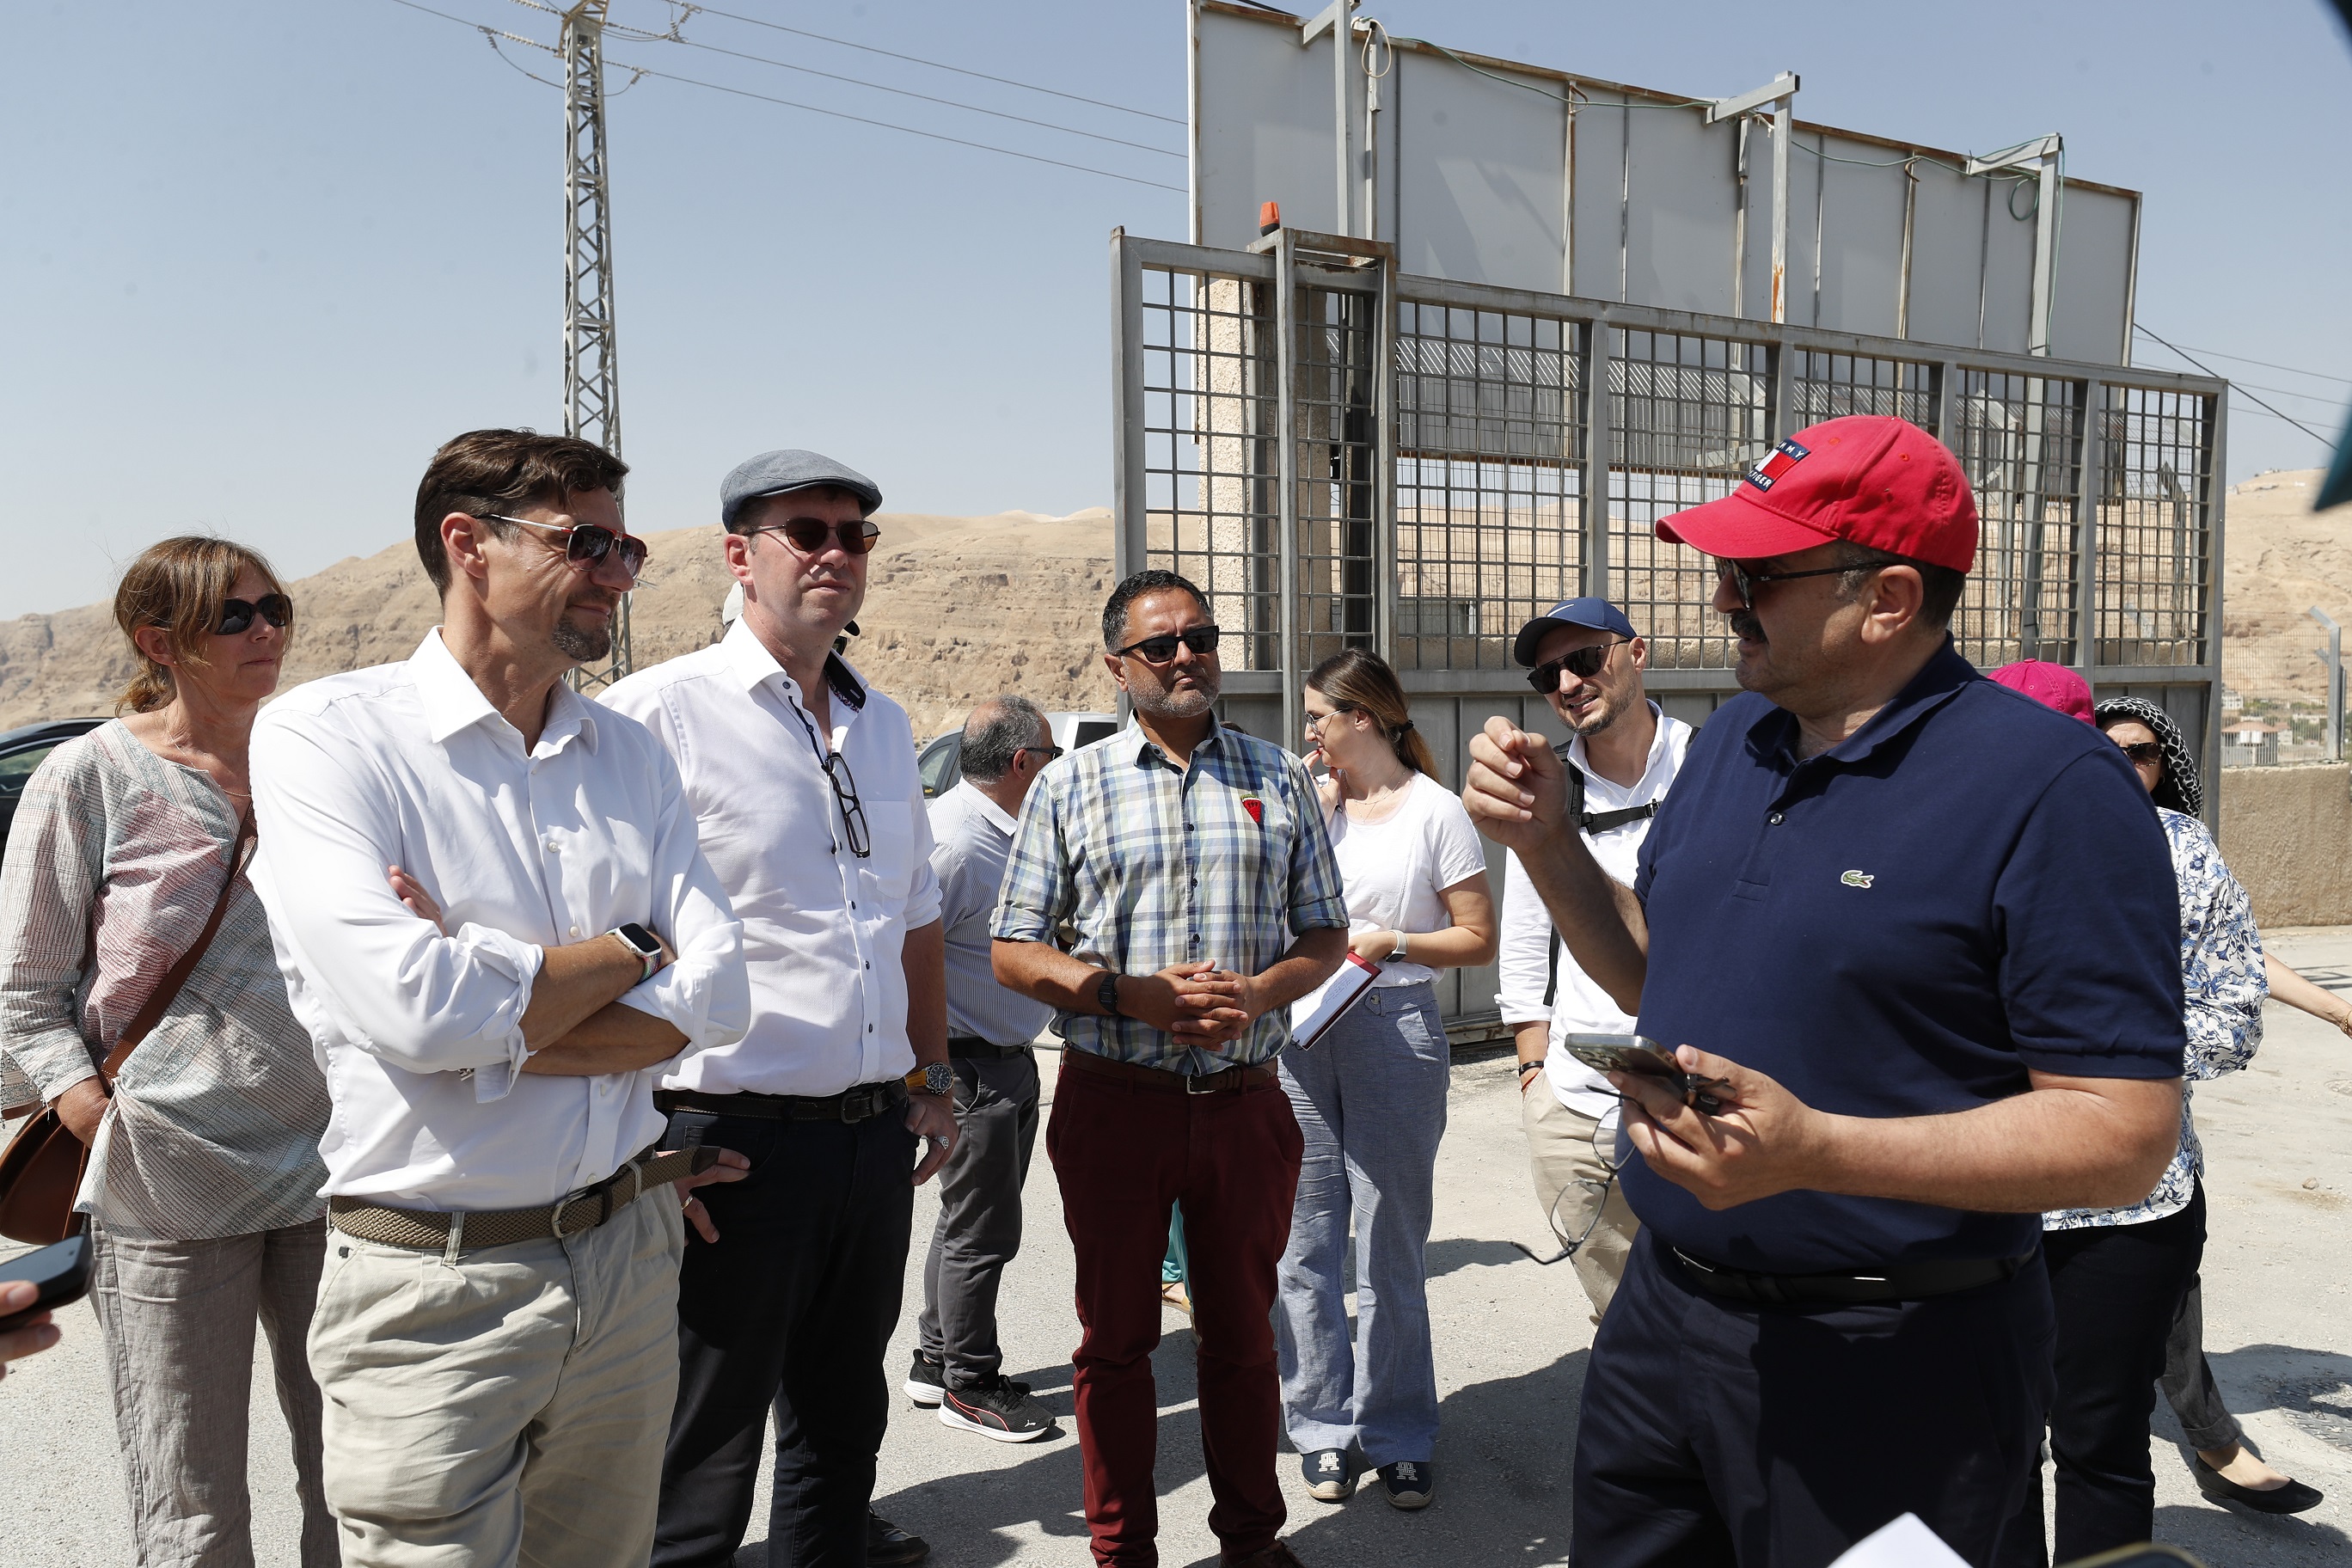 EU and partners visit renewable energy sites north of Jericho and raise concerns about Israeli settlement expansion